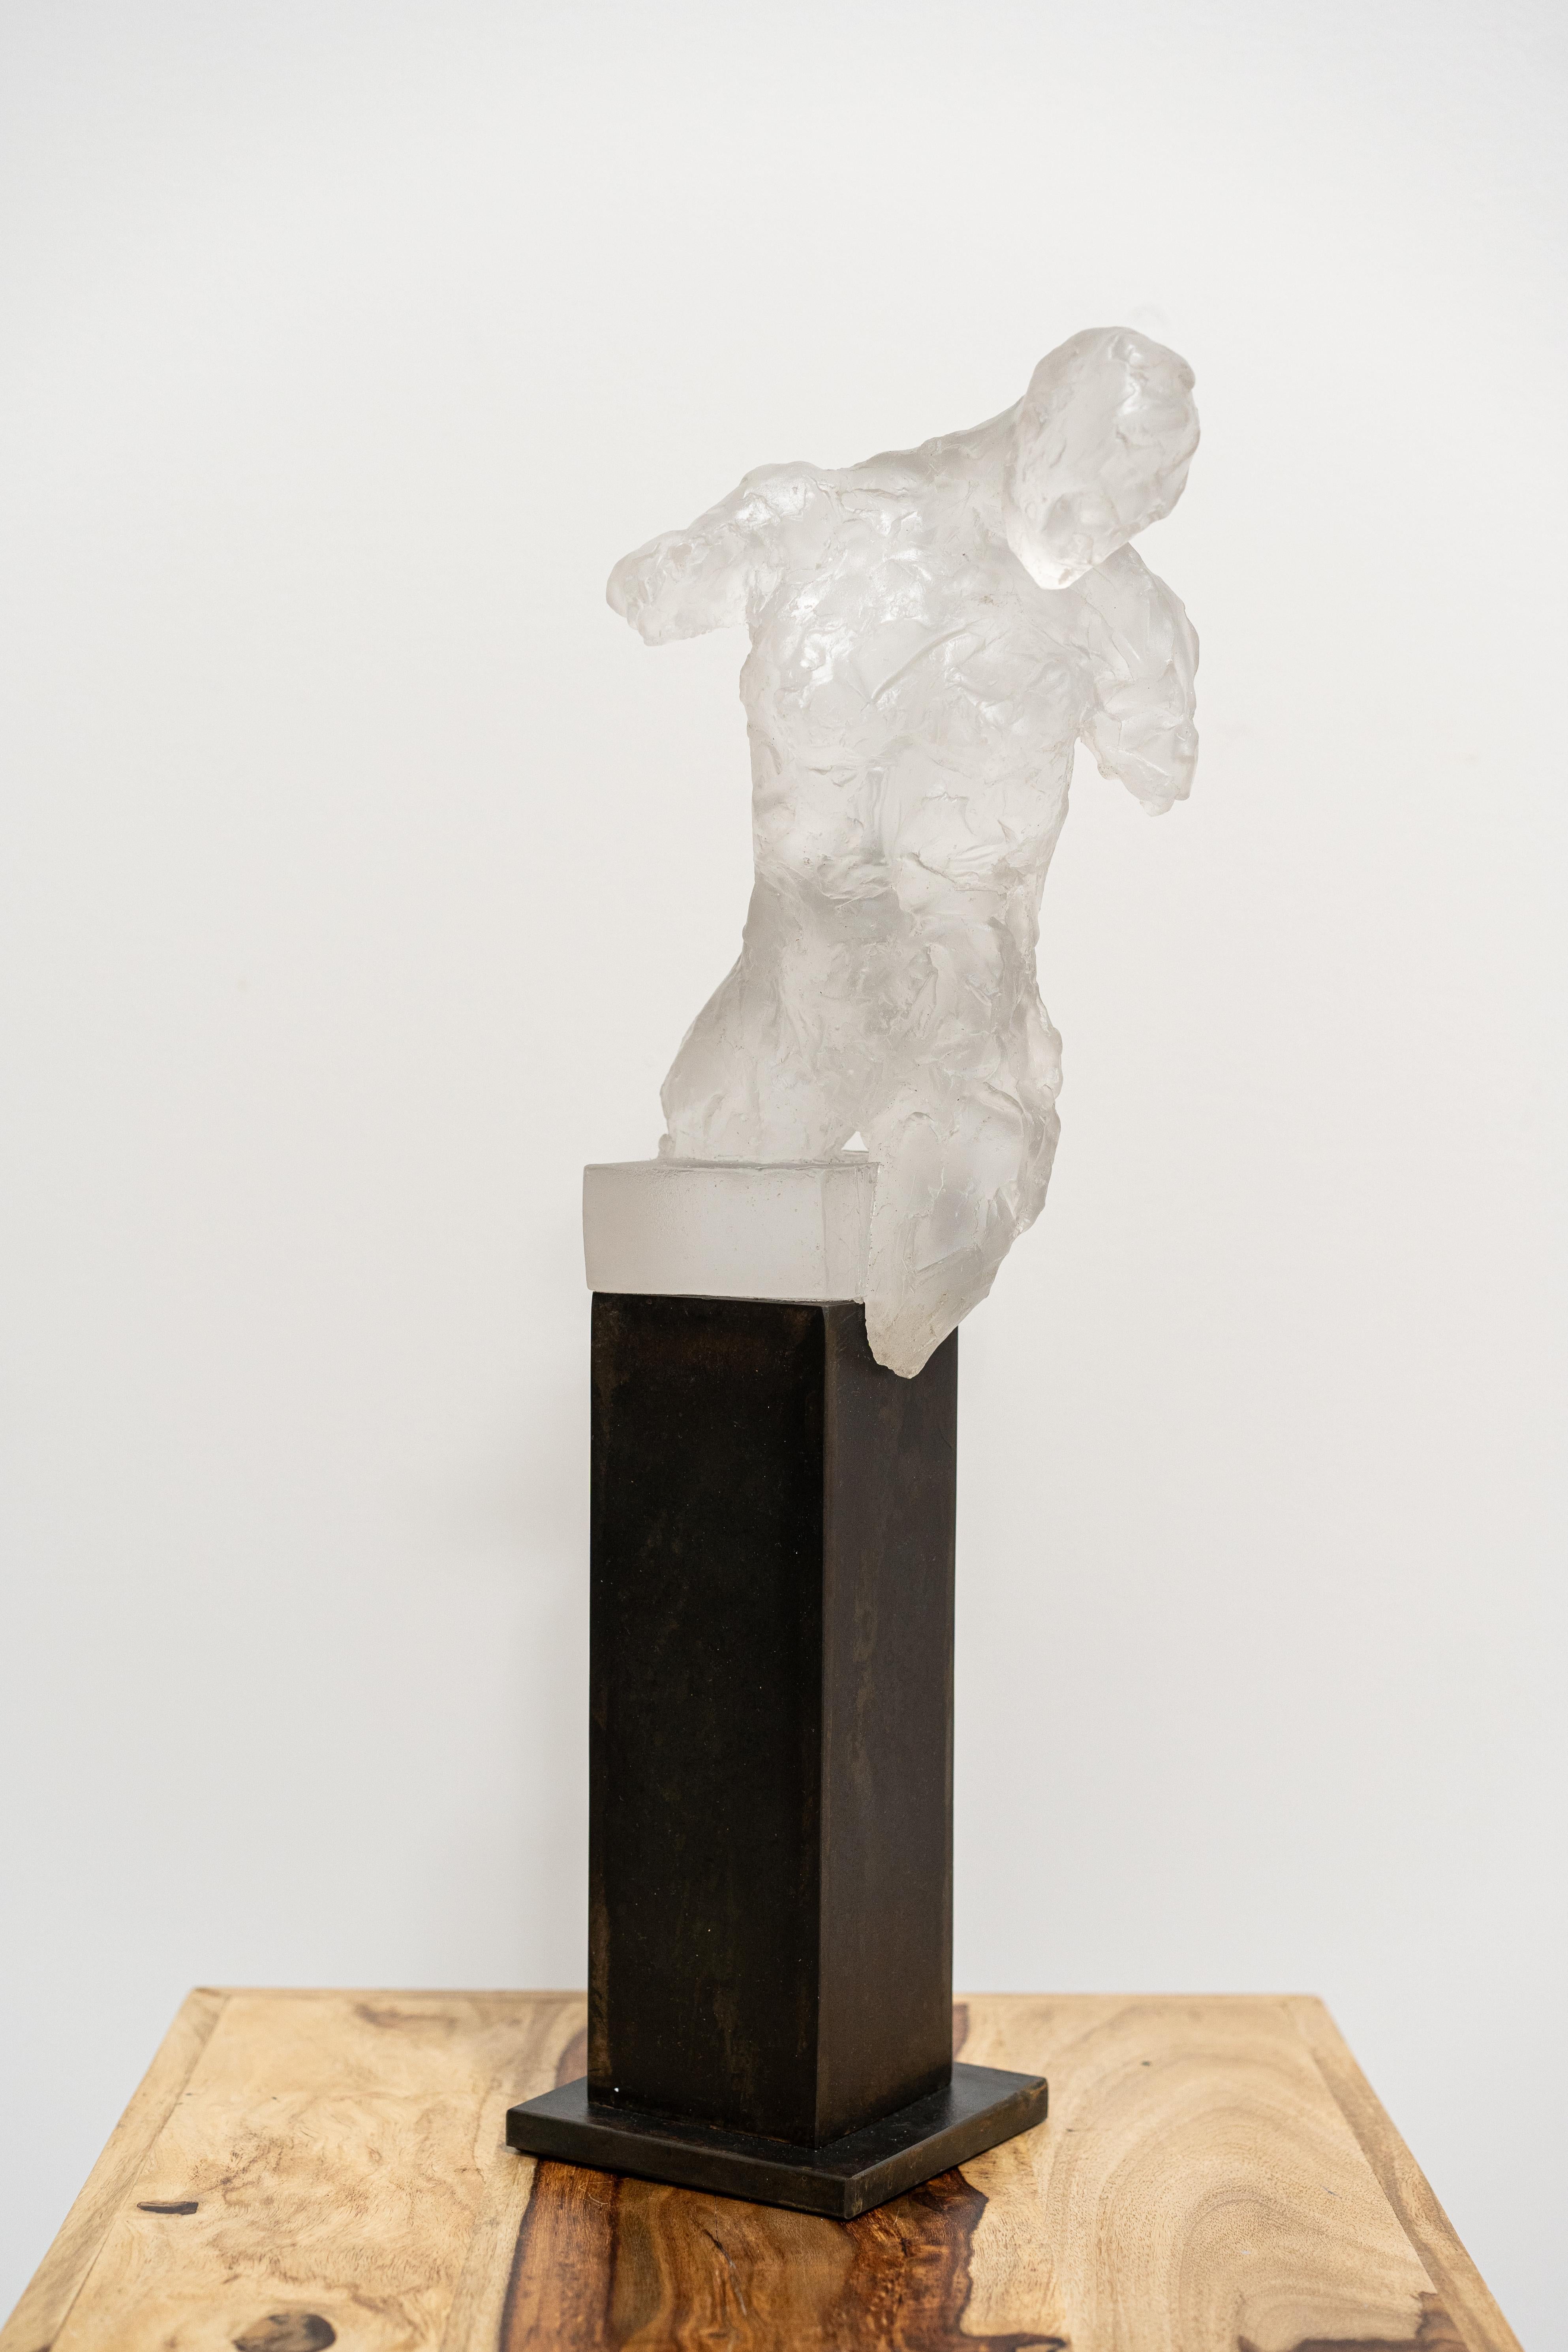 Become op/ed - Sculpture by Gail Folwell